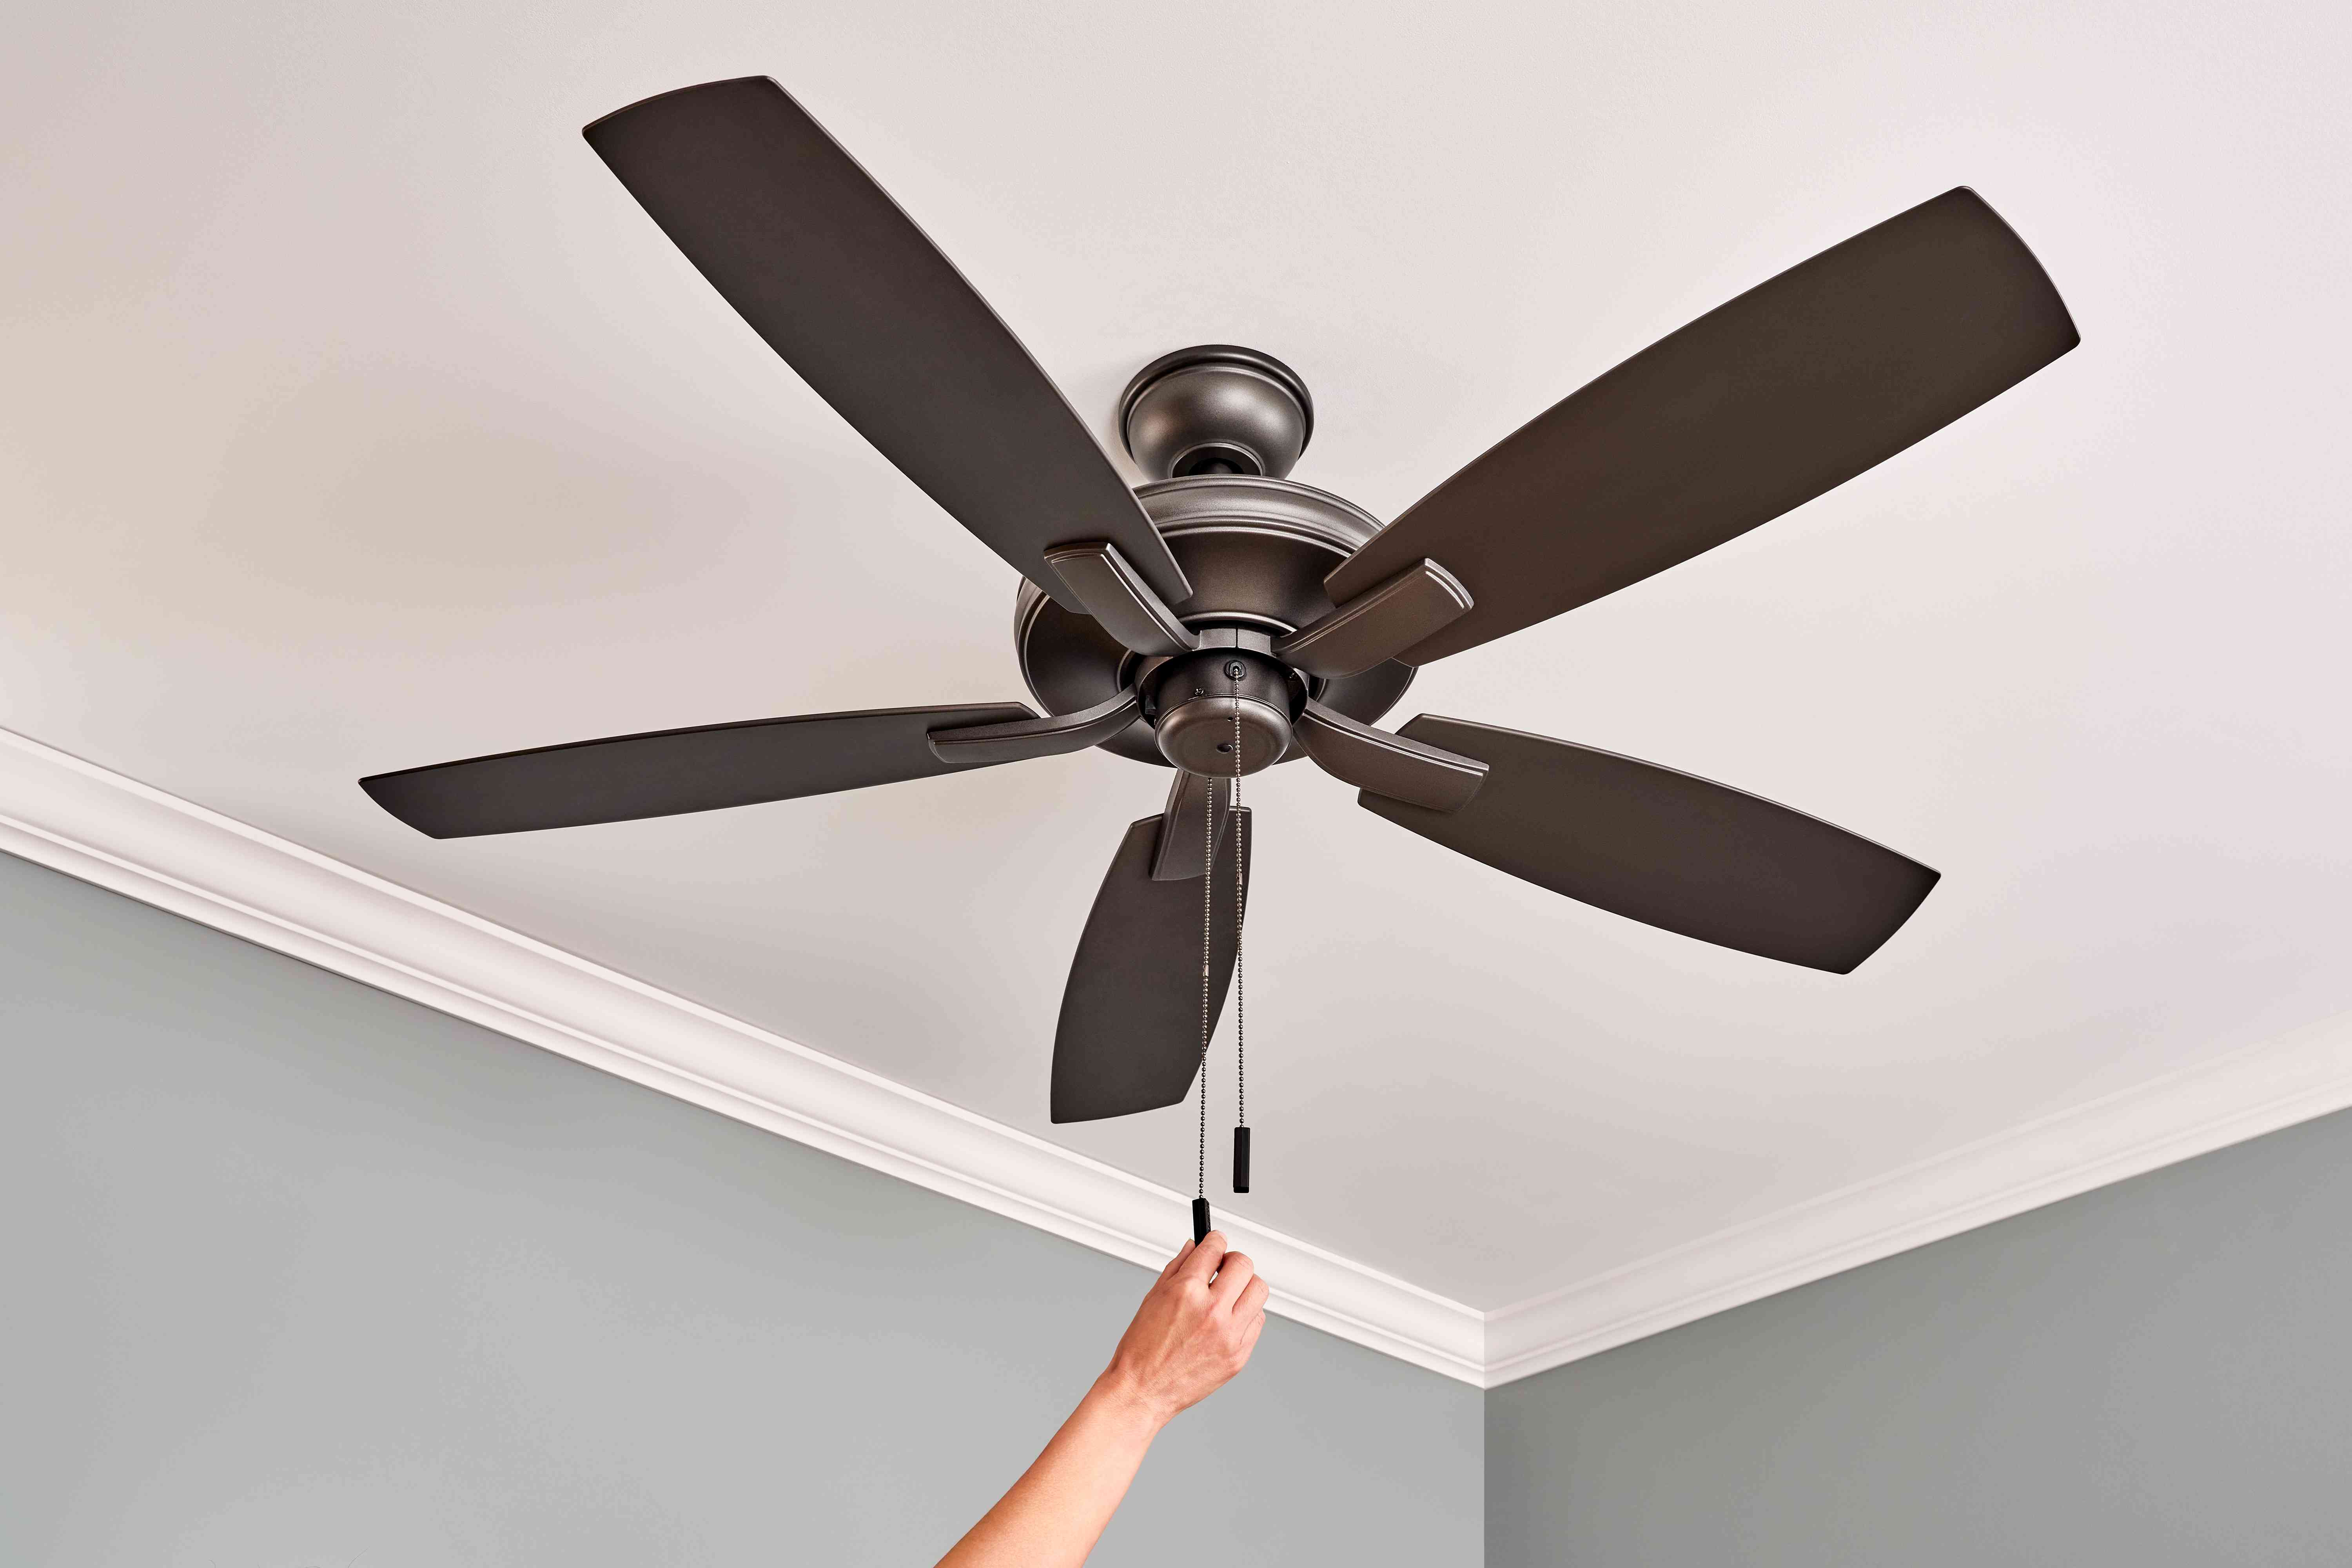 How To Turn On Ceiling Fan Without Remote